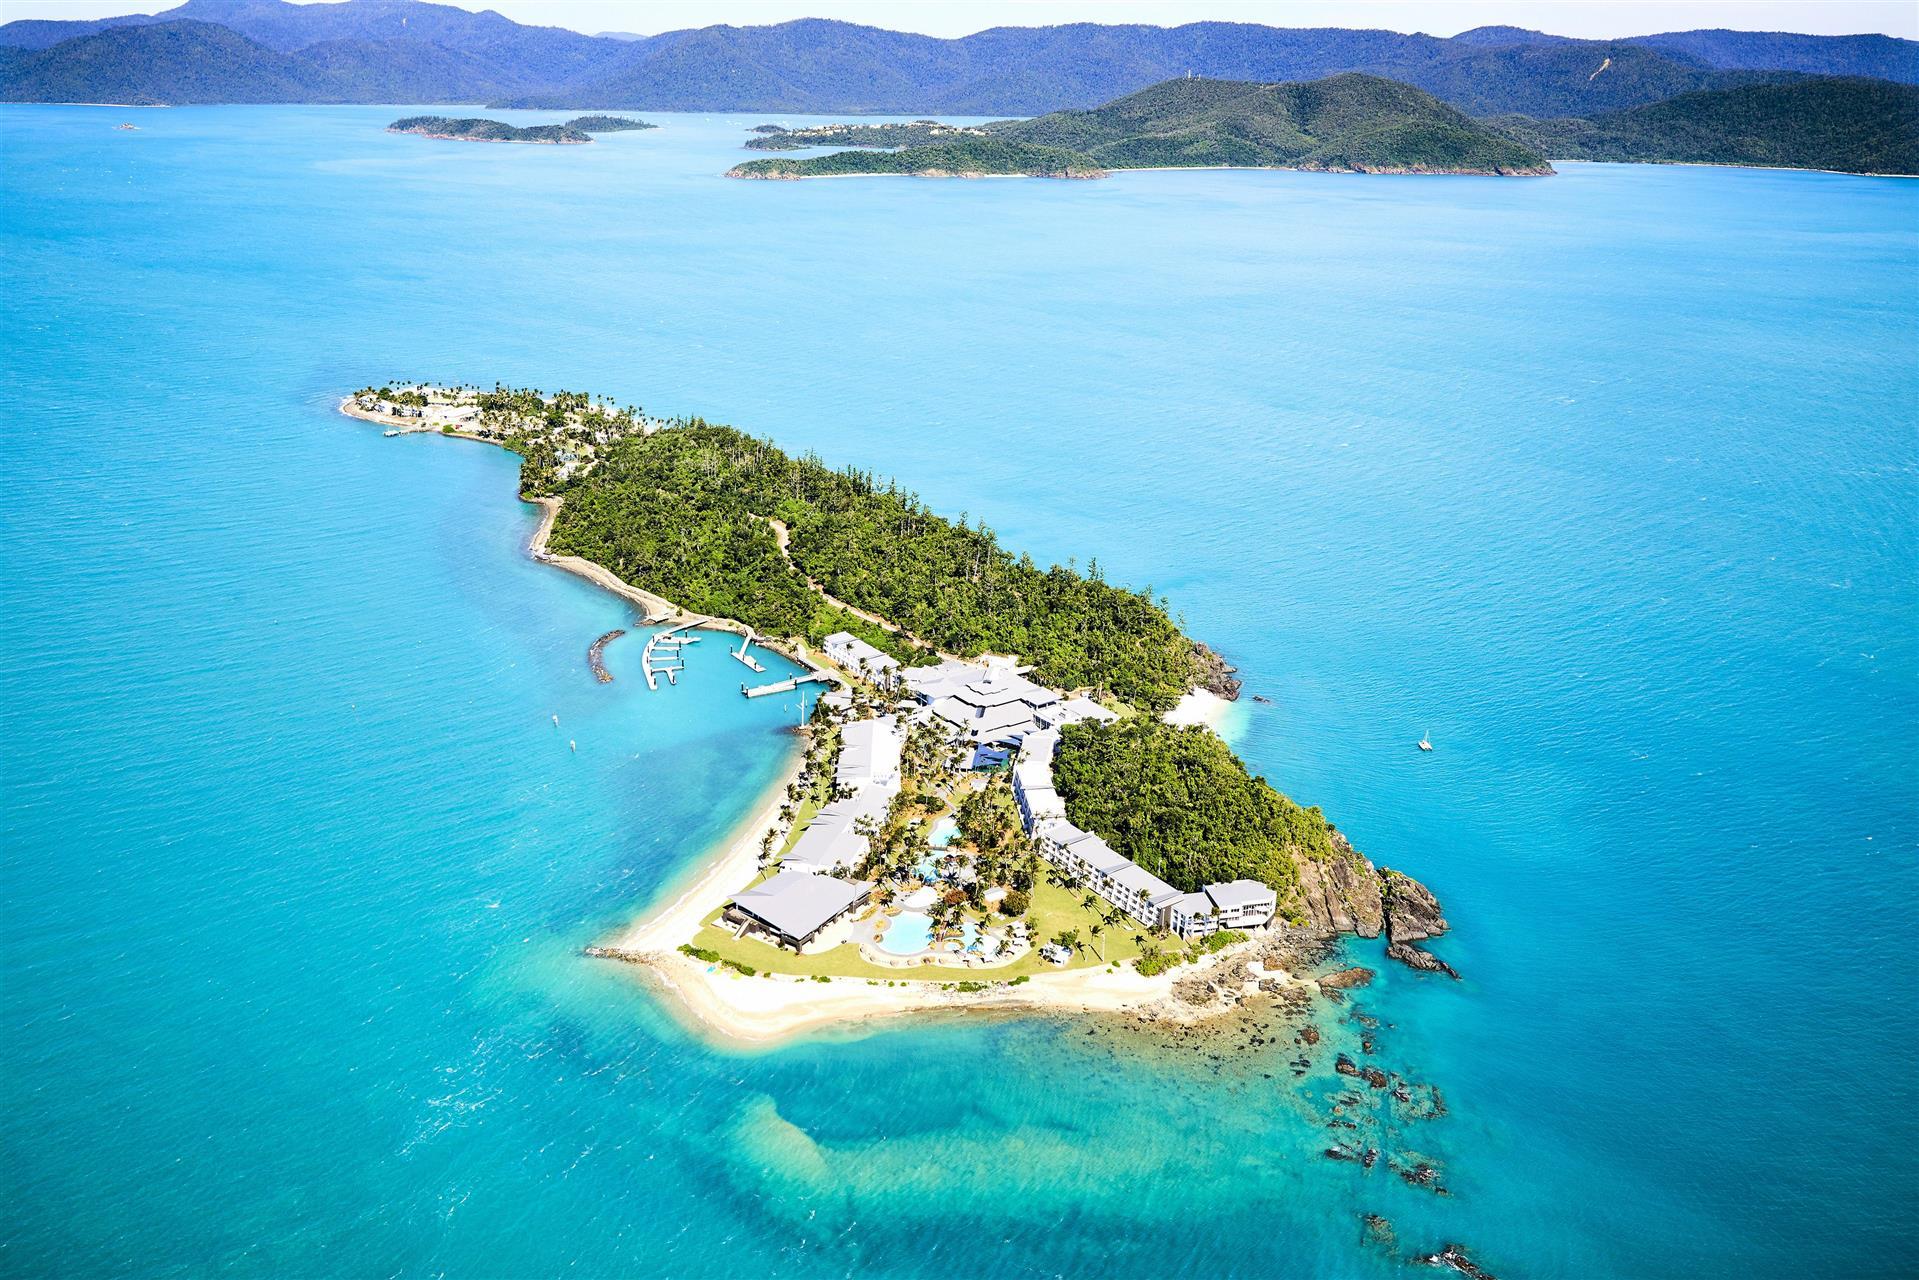 Daydream Island Resort and Living Reef in Whitsundays, AU